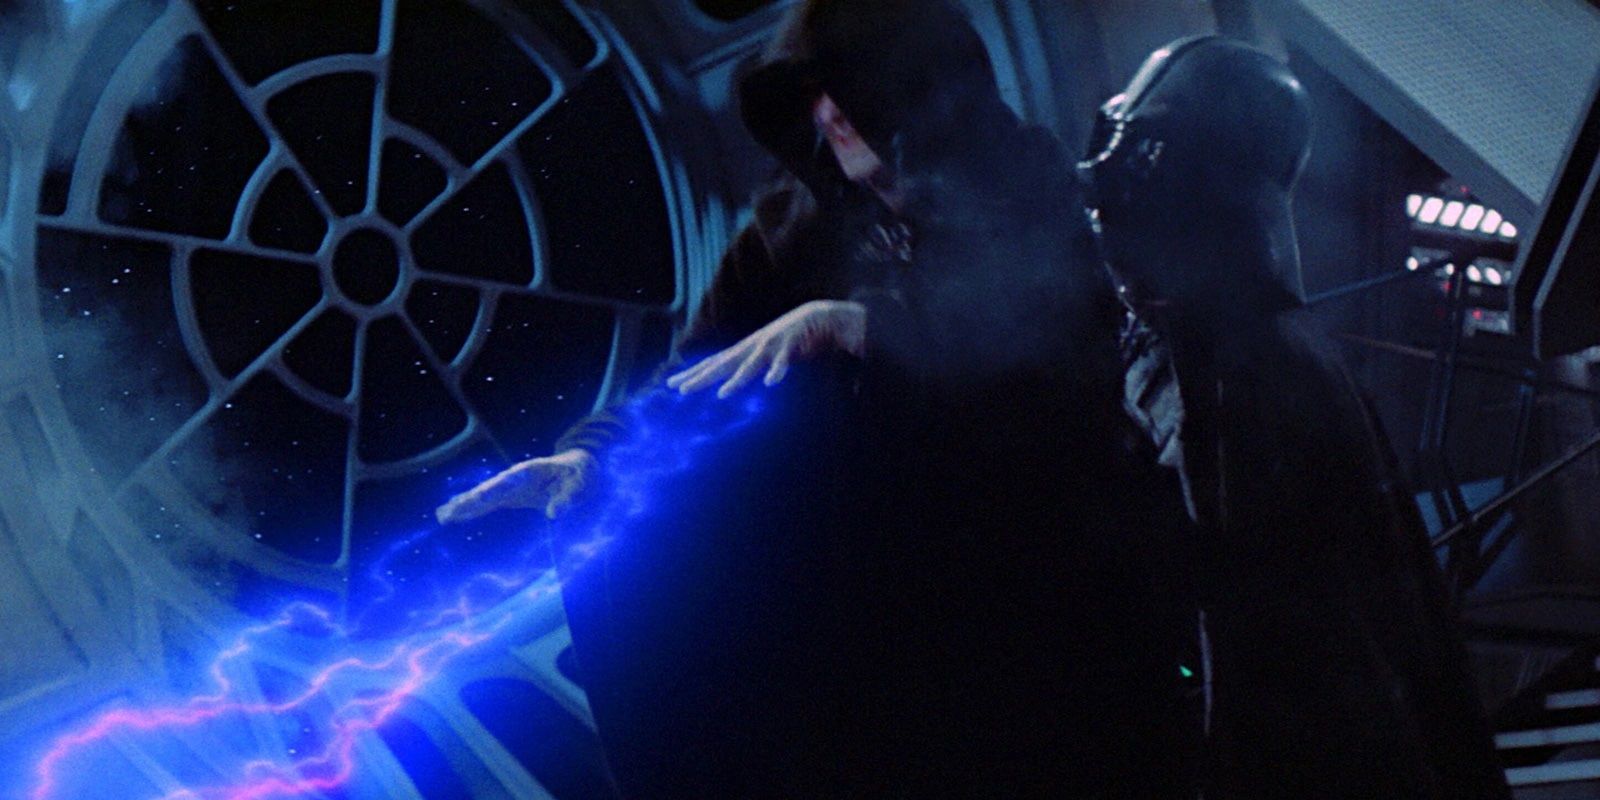 Vader lifts the Emperor to kill him as Palpatine uses Force lightning in Return of the Jedi